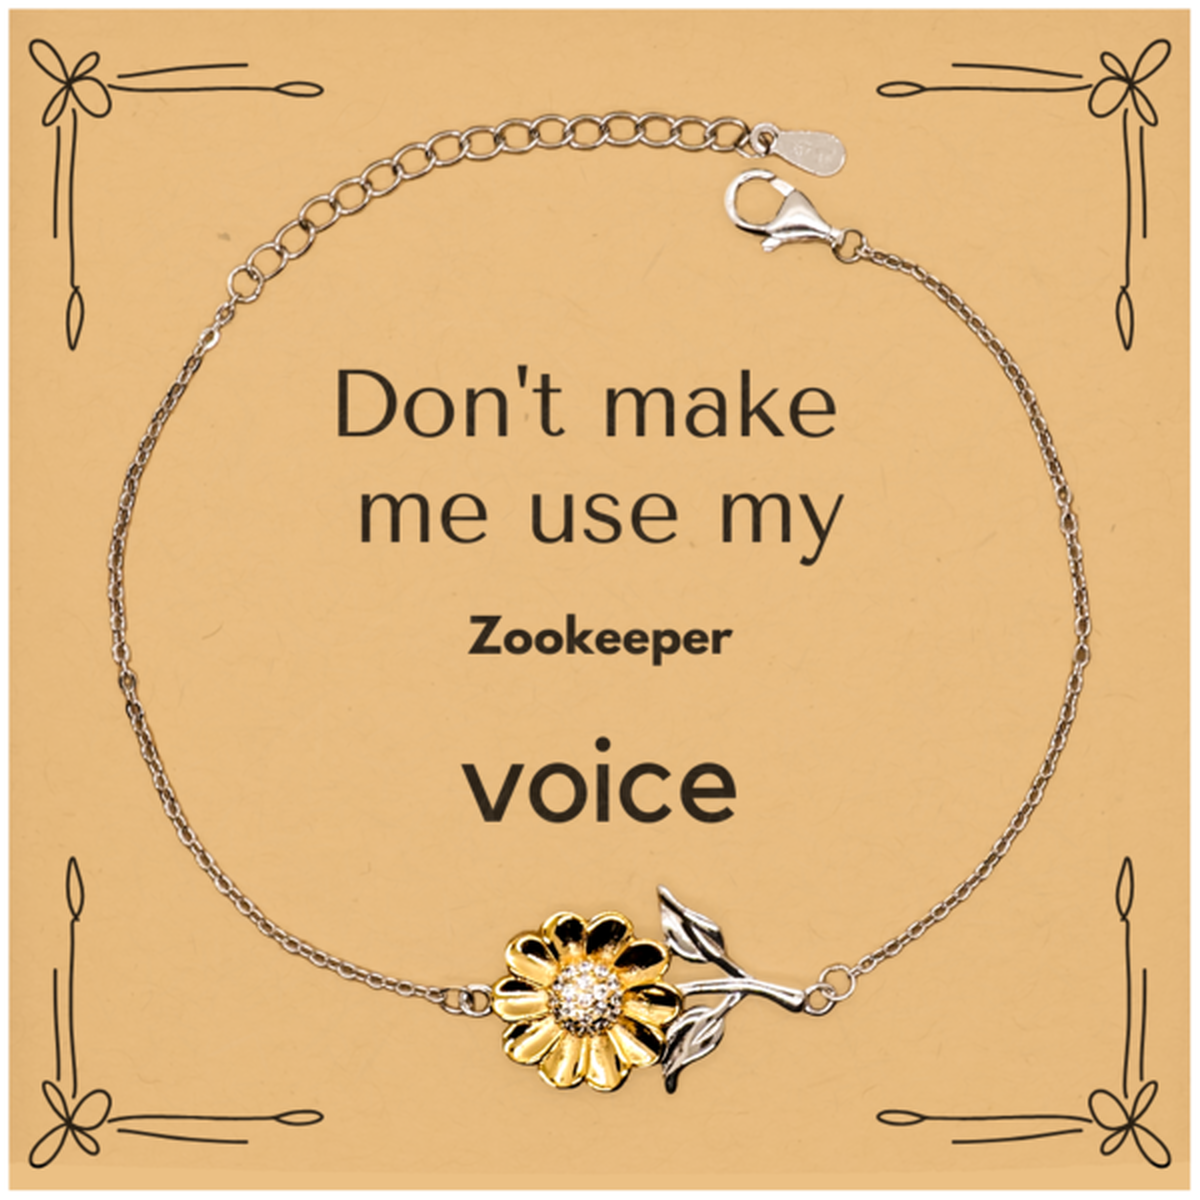 Don't make me use my Zookeeper voice, Sarcasm Zookeeper Card Gifts, Christmas Zookeeper Sunflower Bracelet Birthday Unique Gifts For Zookeeper Coworkers, Men, Women, Colleague, Friends